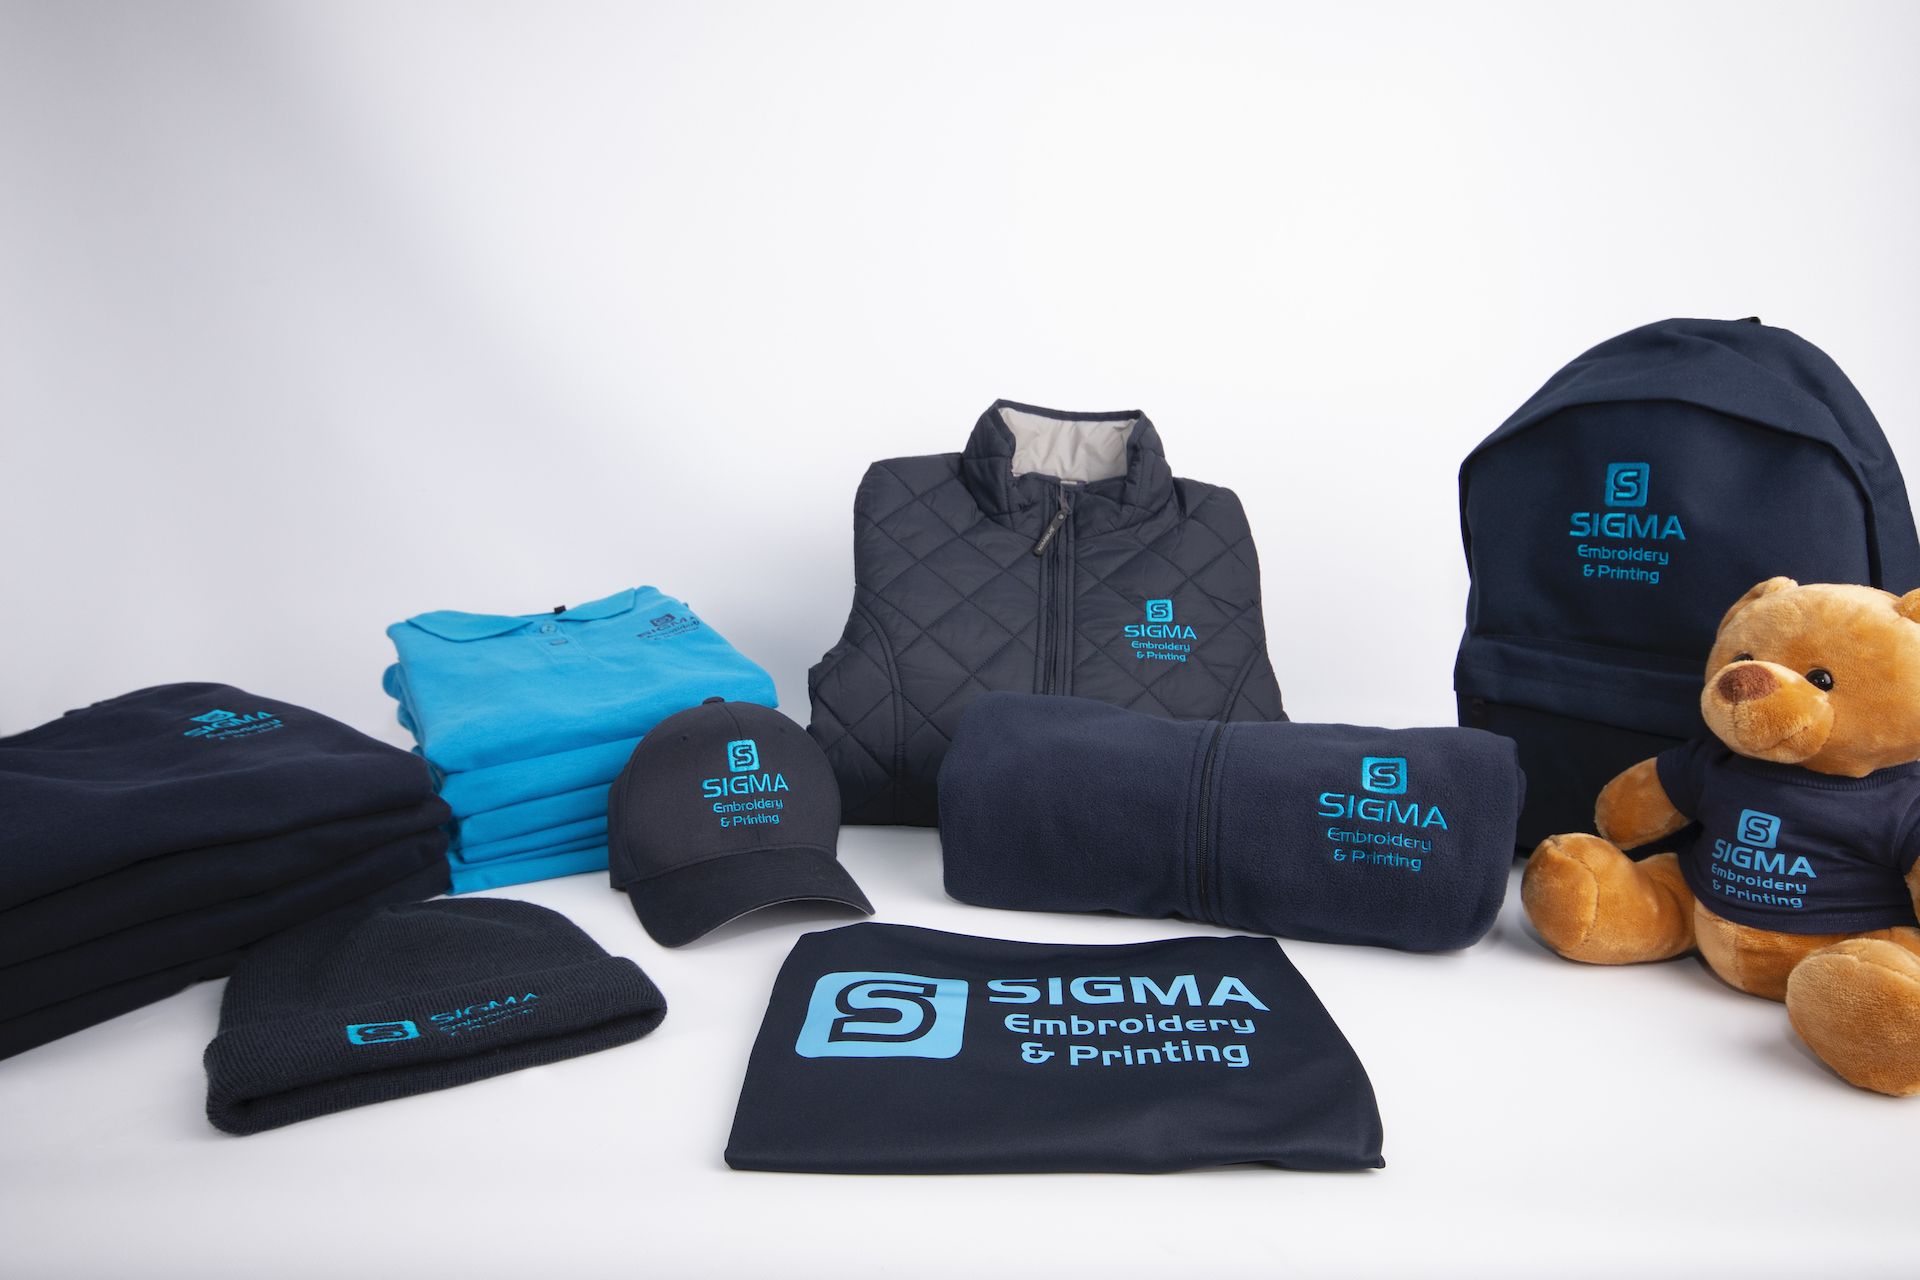 Sigma Branded clothing